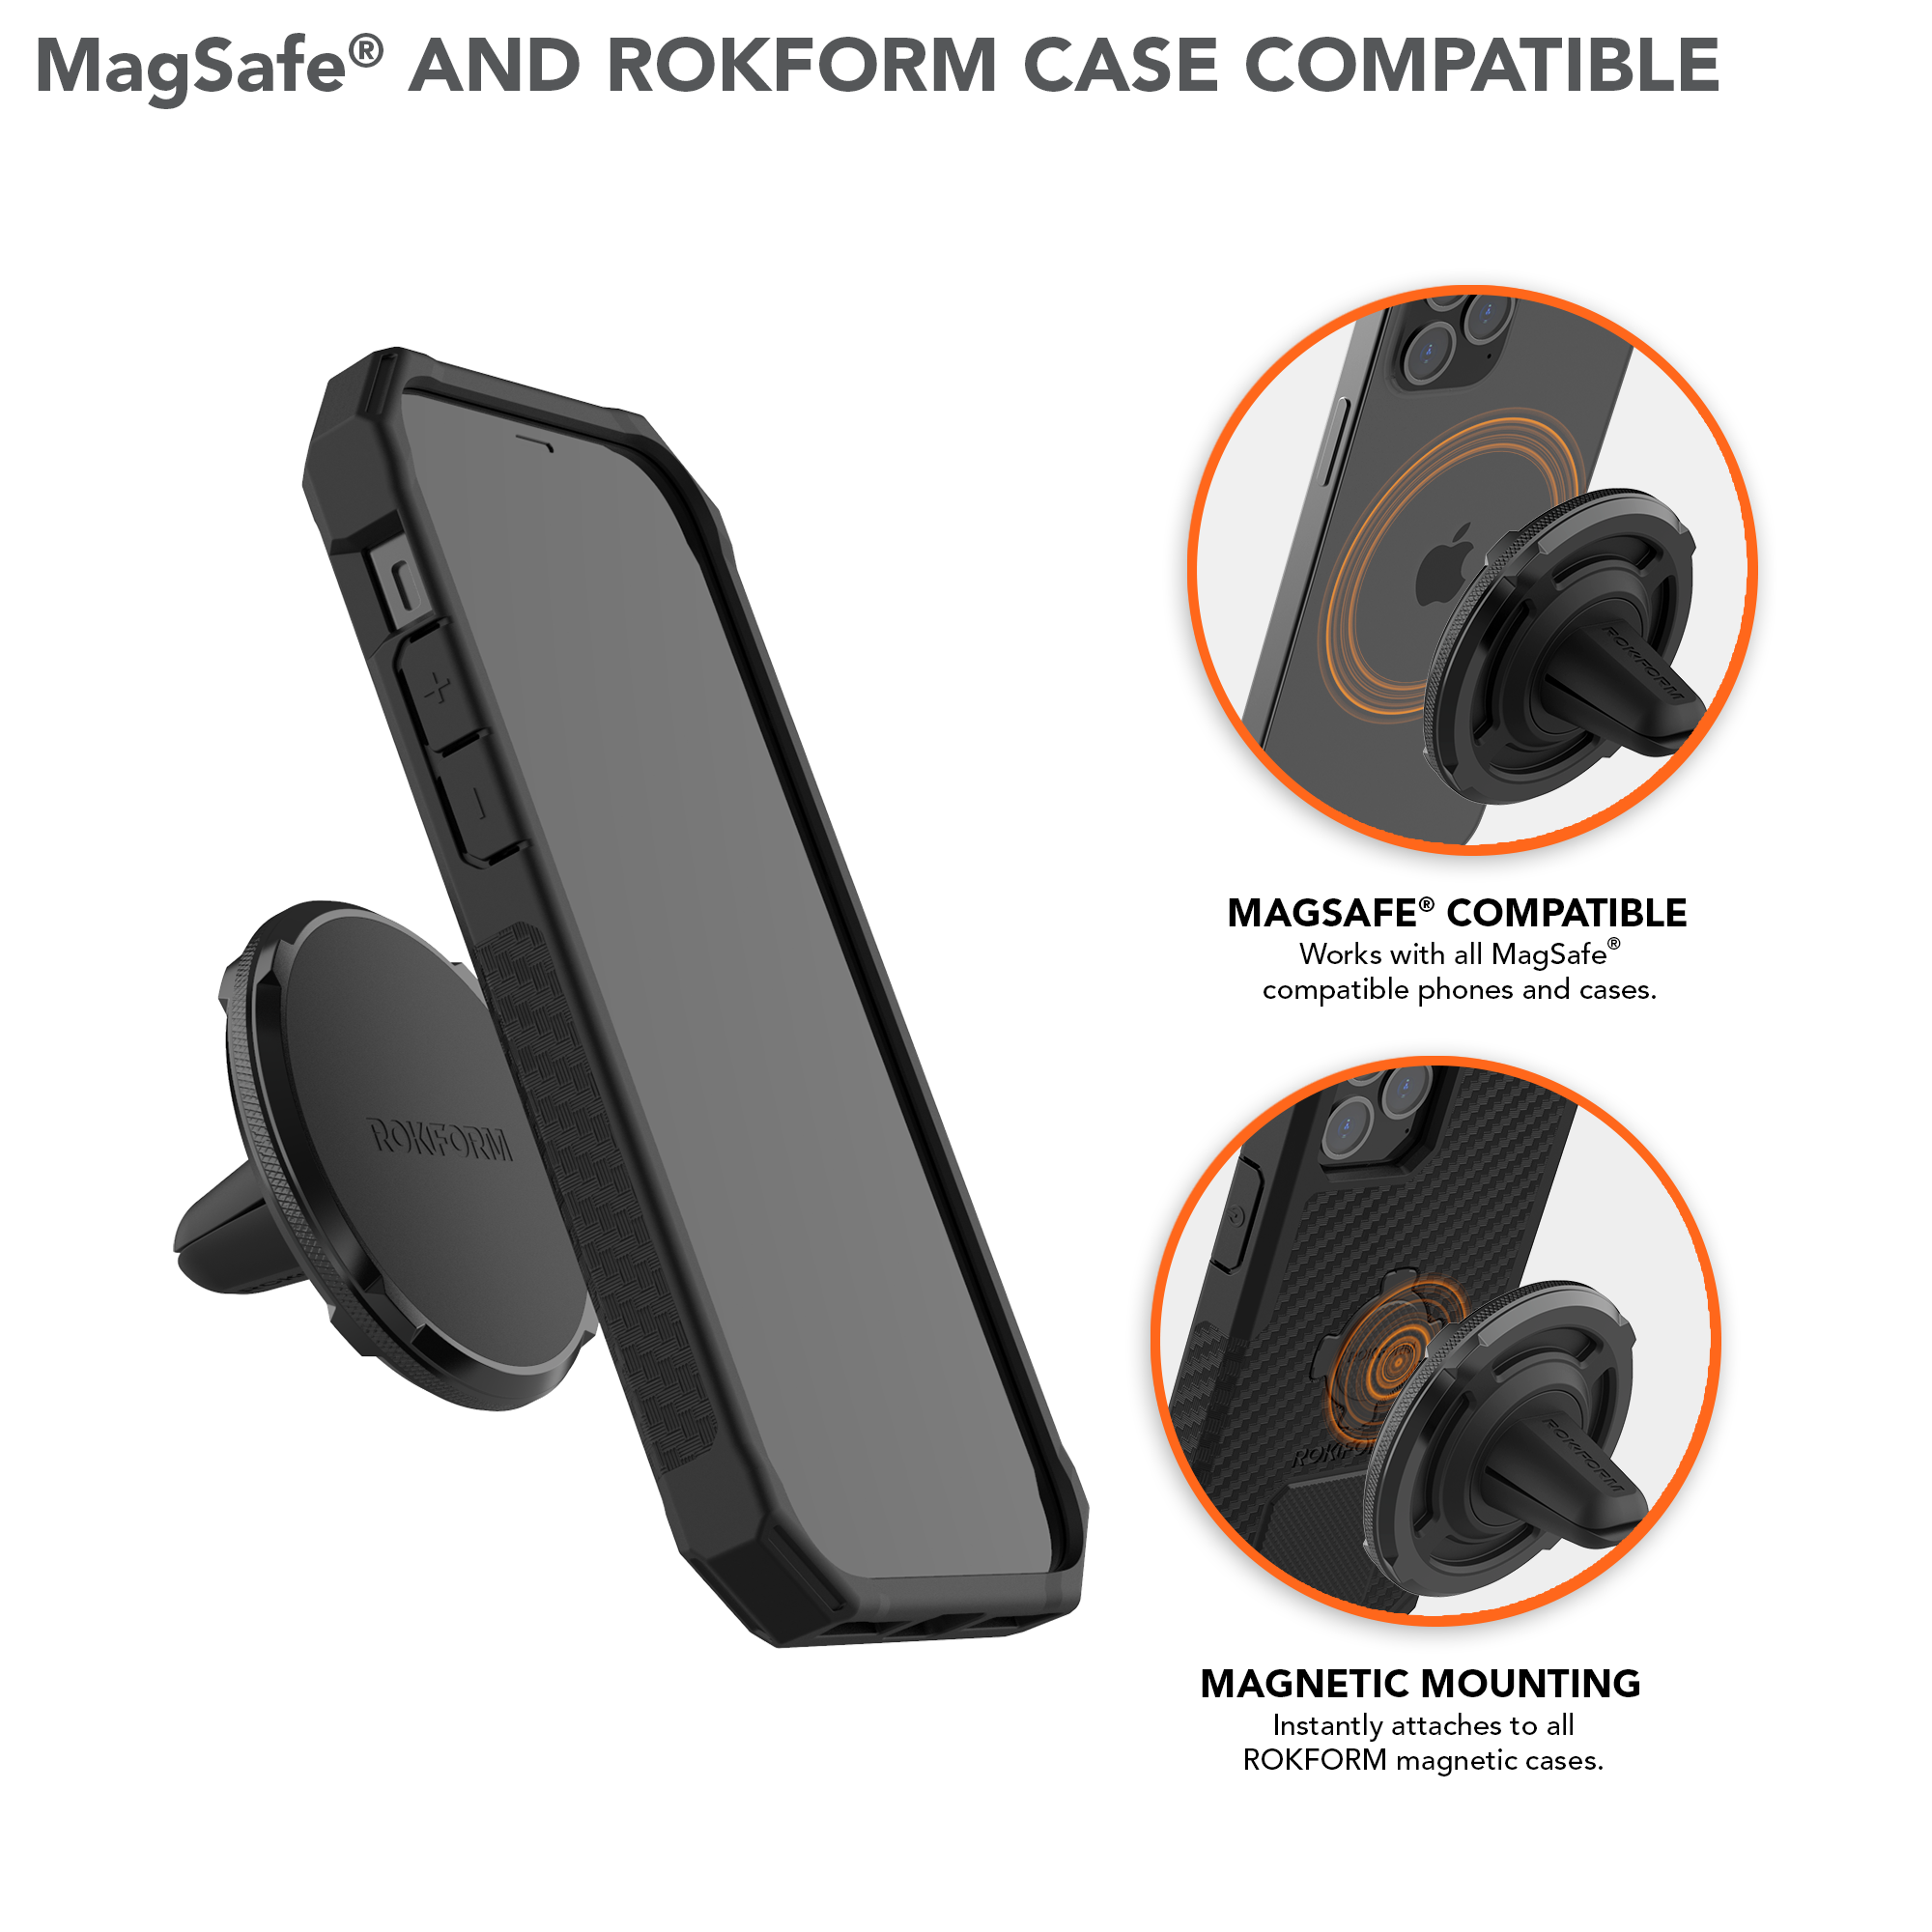 Rokform Magnetic Phone Vent Mount - MagSafe® Compatible